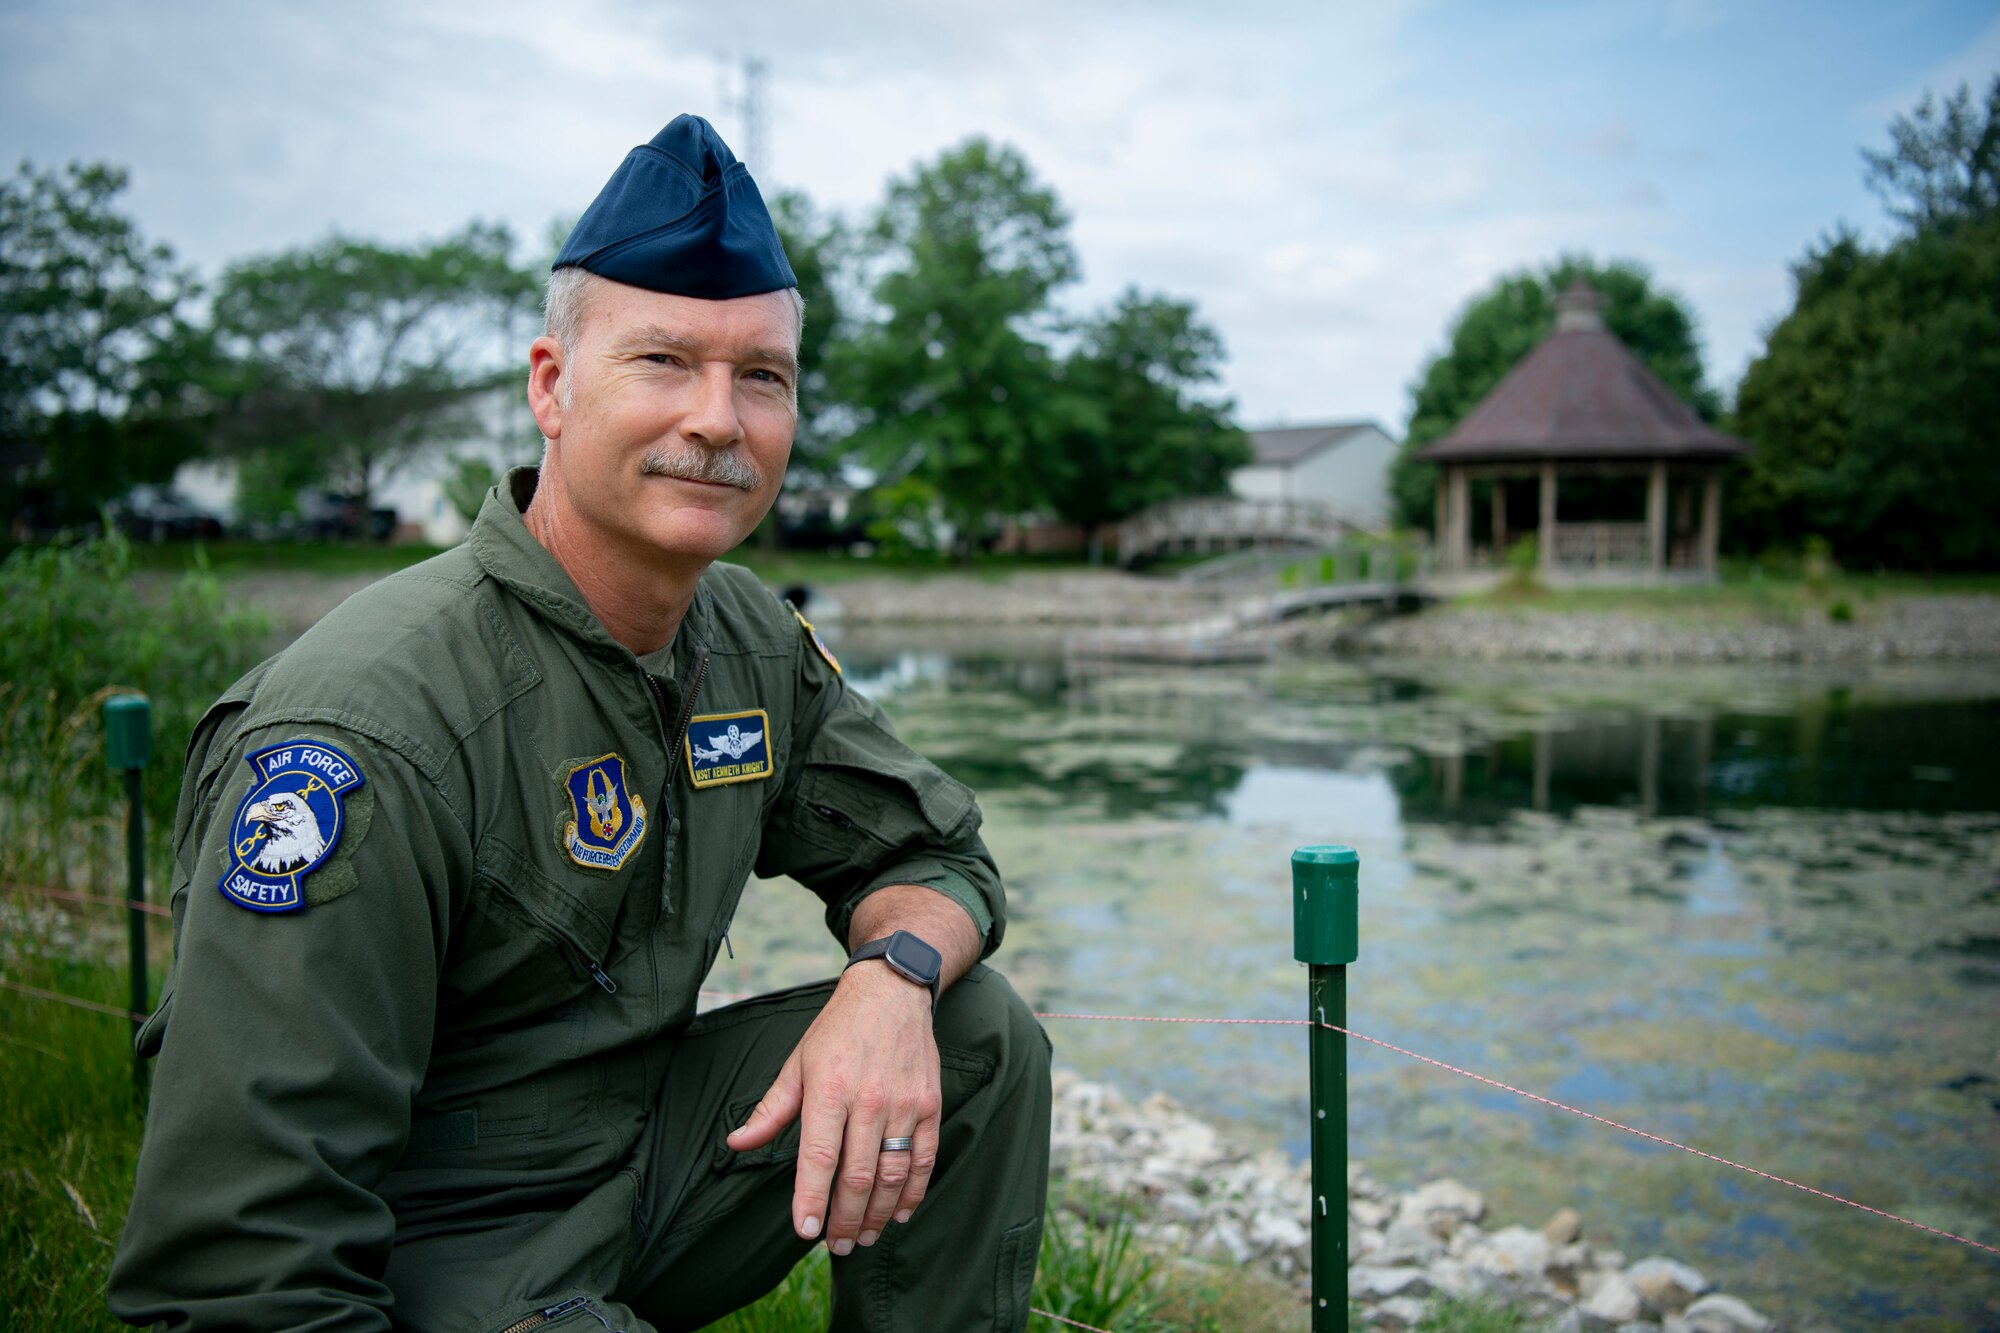 Master Sgt. Kenneth Knight, 434th Air Refueling Wing flight safety NCO, poses near the string fence surrounding the pond near Civil Engineering, June 23, 2022, at Grissom Air Reserve Base, Indiana. The string fence deters Canadian Geese from choosing the pond as their nesting ground. (U.S. Air Force photo by Staff Sgt. Alexa Culbert)